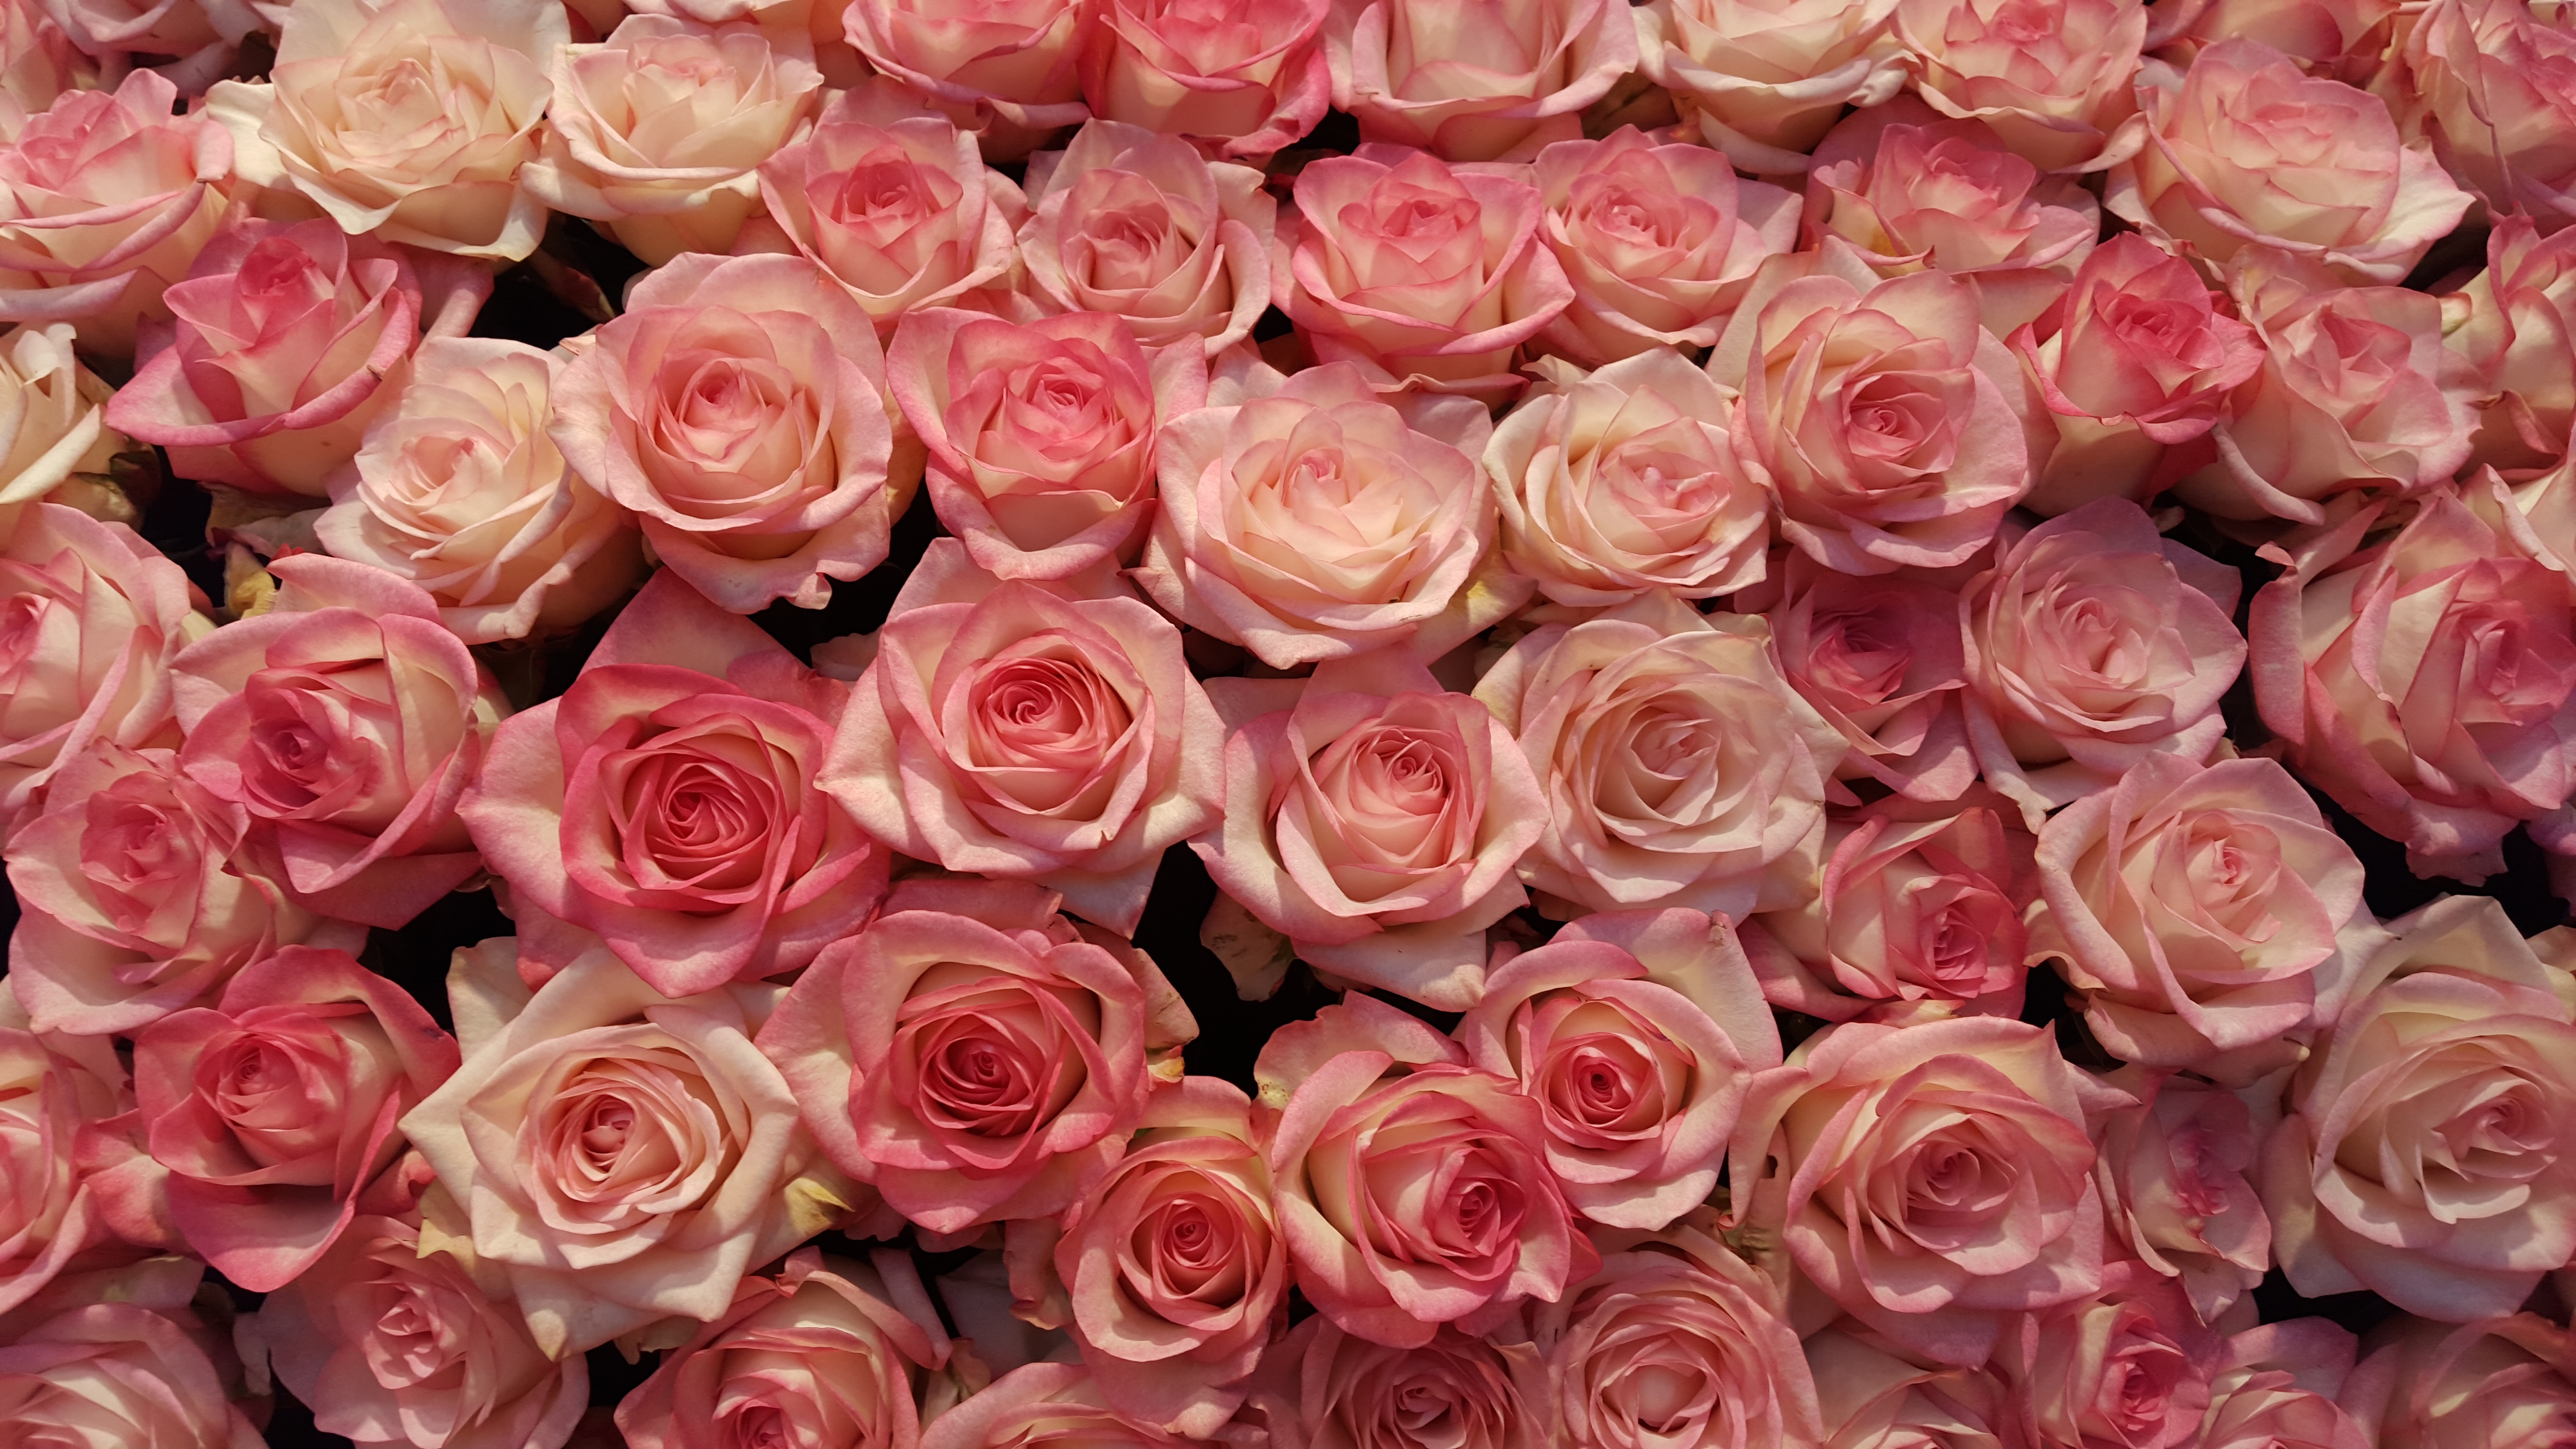 A background of pink roses